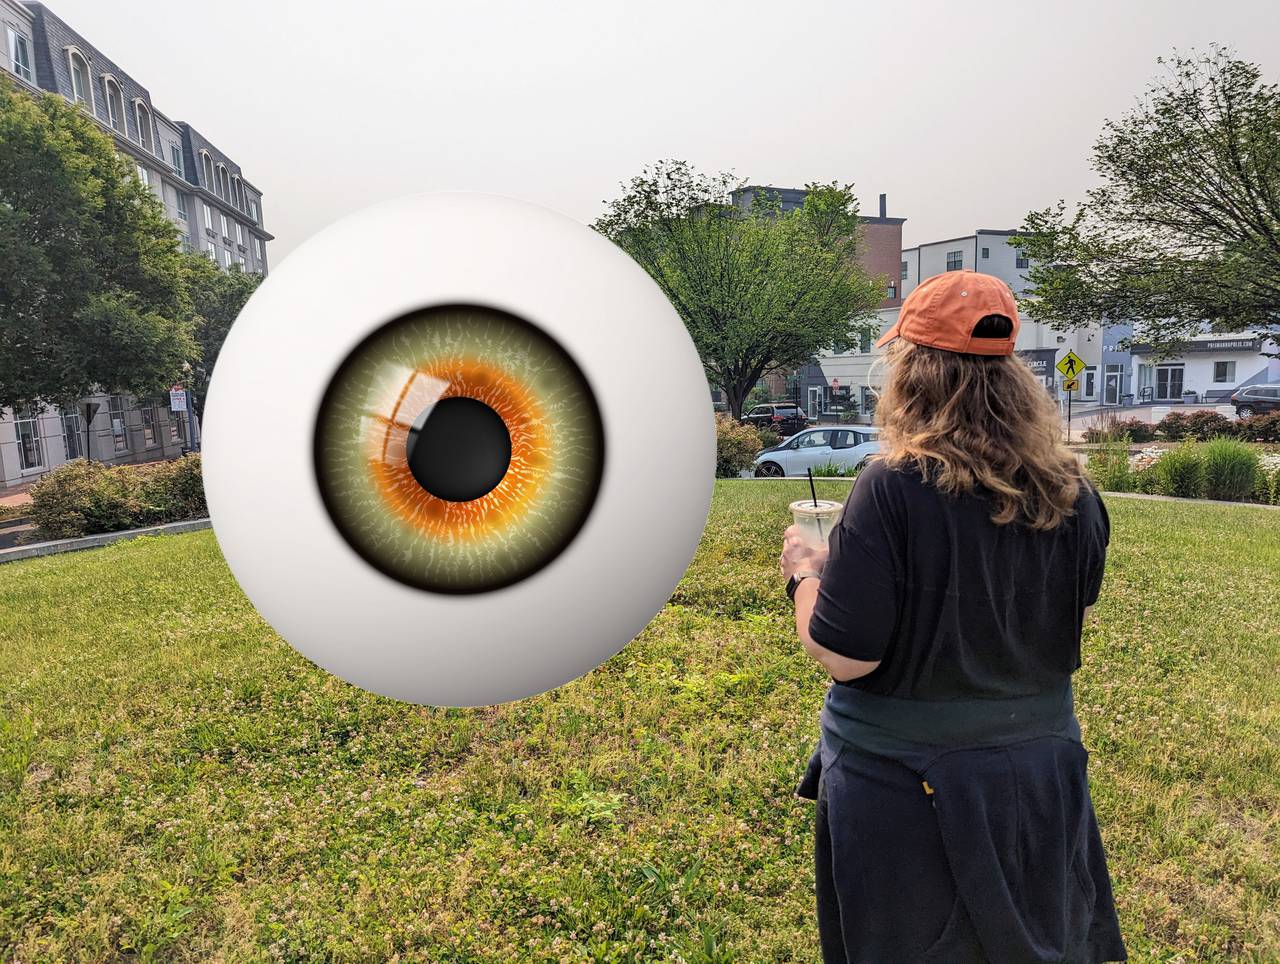 There's no electricity or water on Westgate Circle, and something shiny would distract drivers. How about a big eyeball to let everyone know they're being watched?